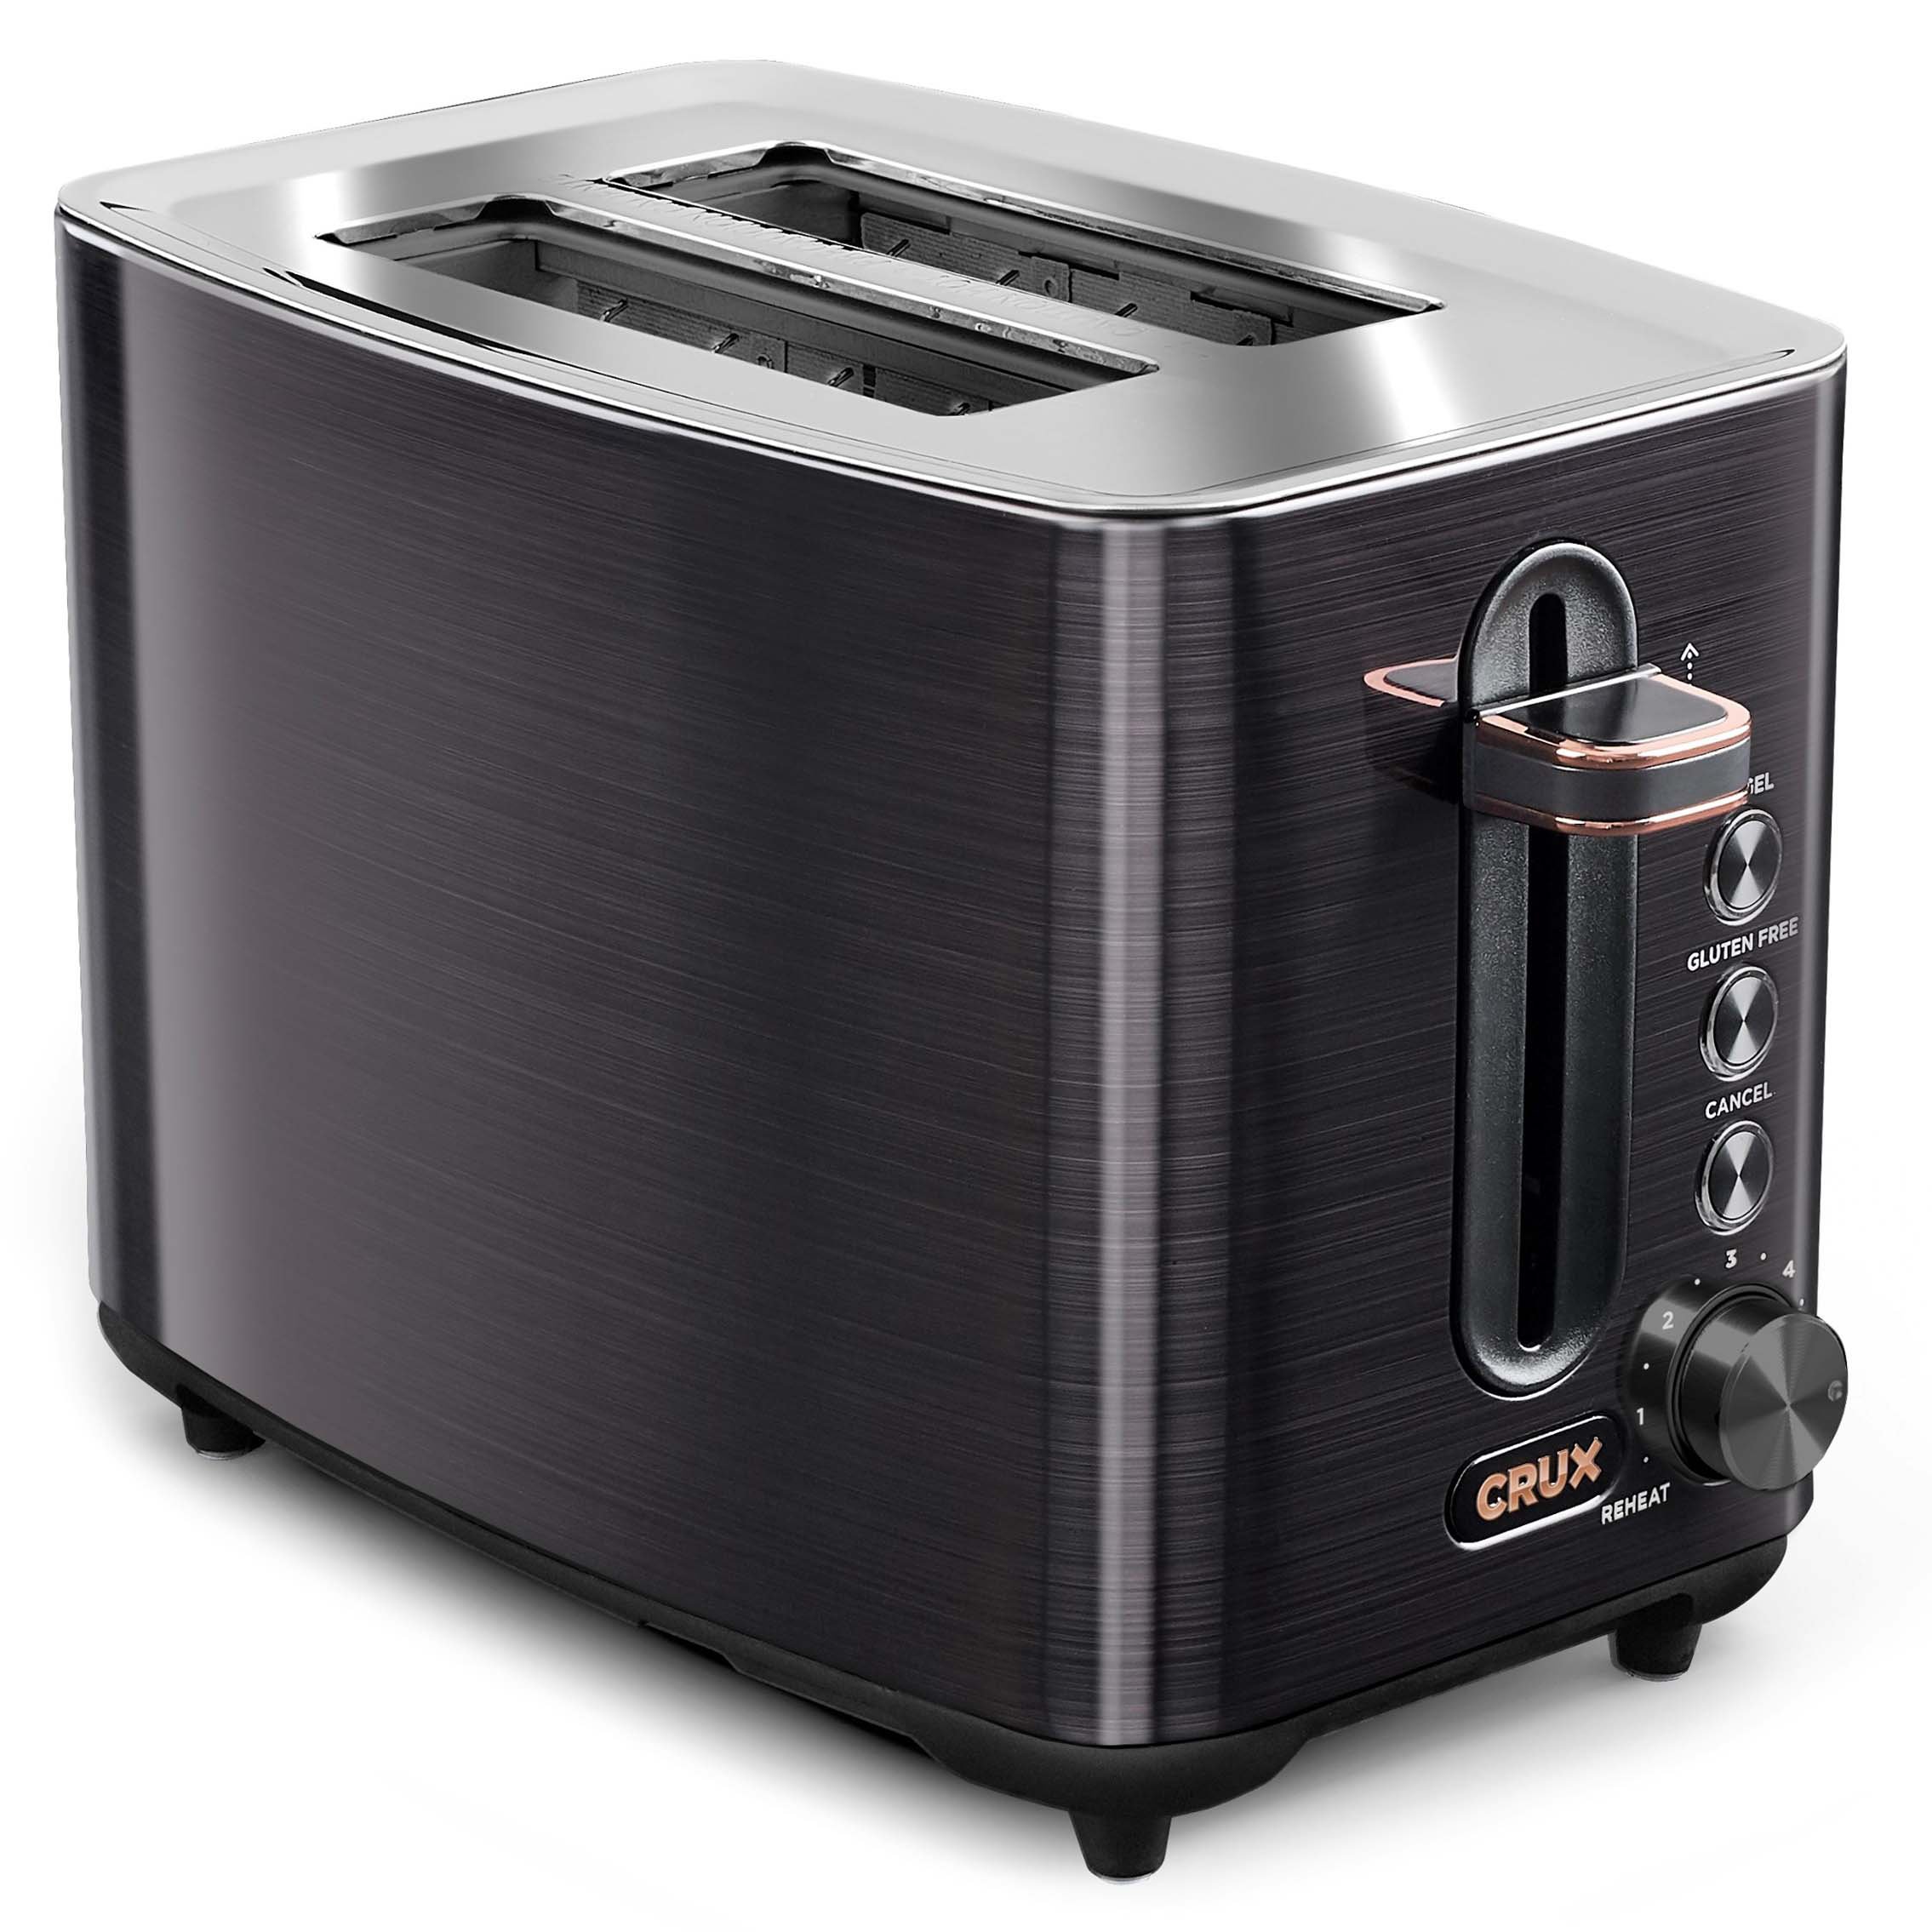 Crux Black Stainless Steel 2 Slice Toaster - Shop Toasters at H-E-B